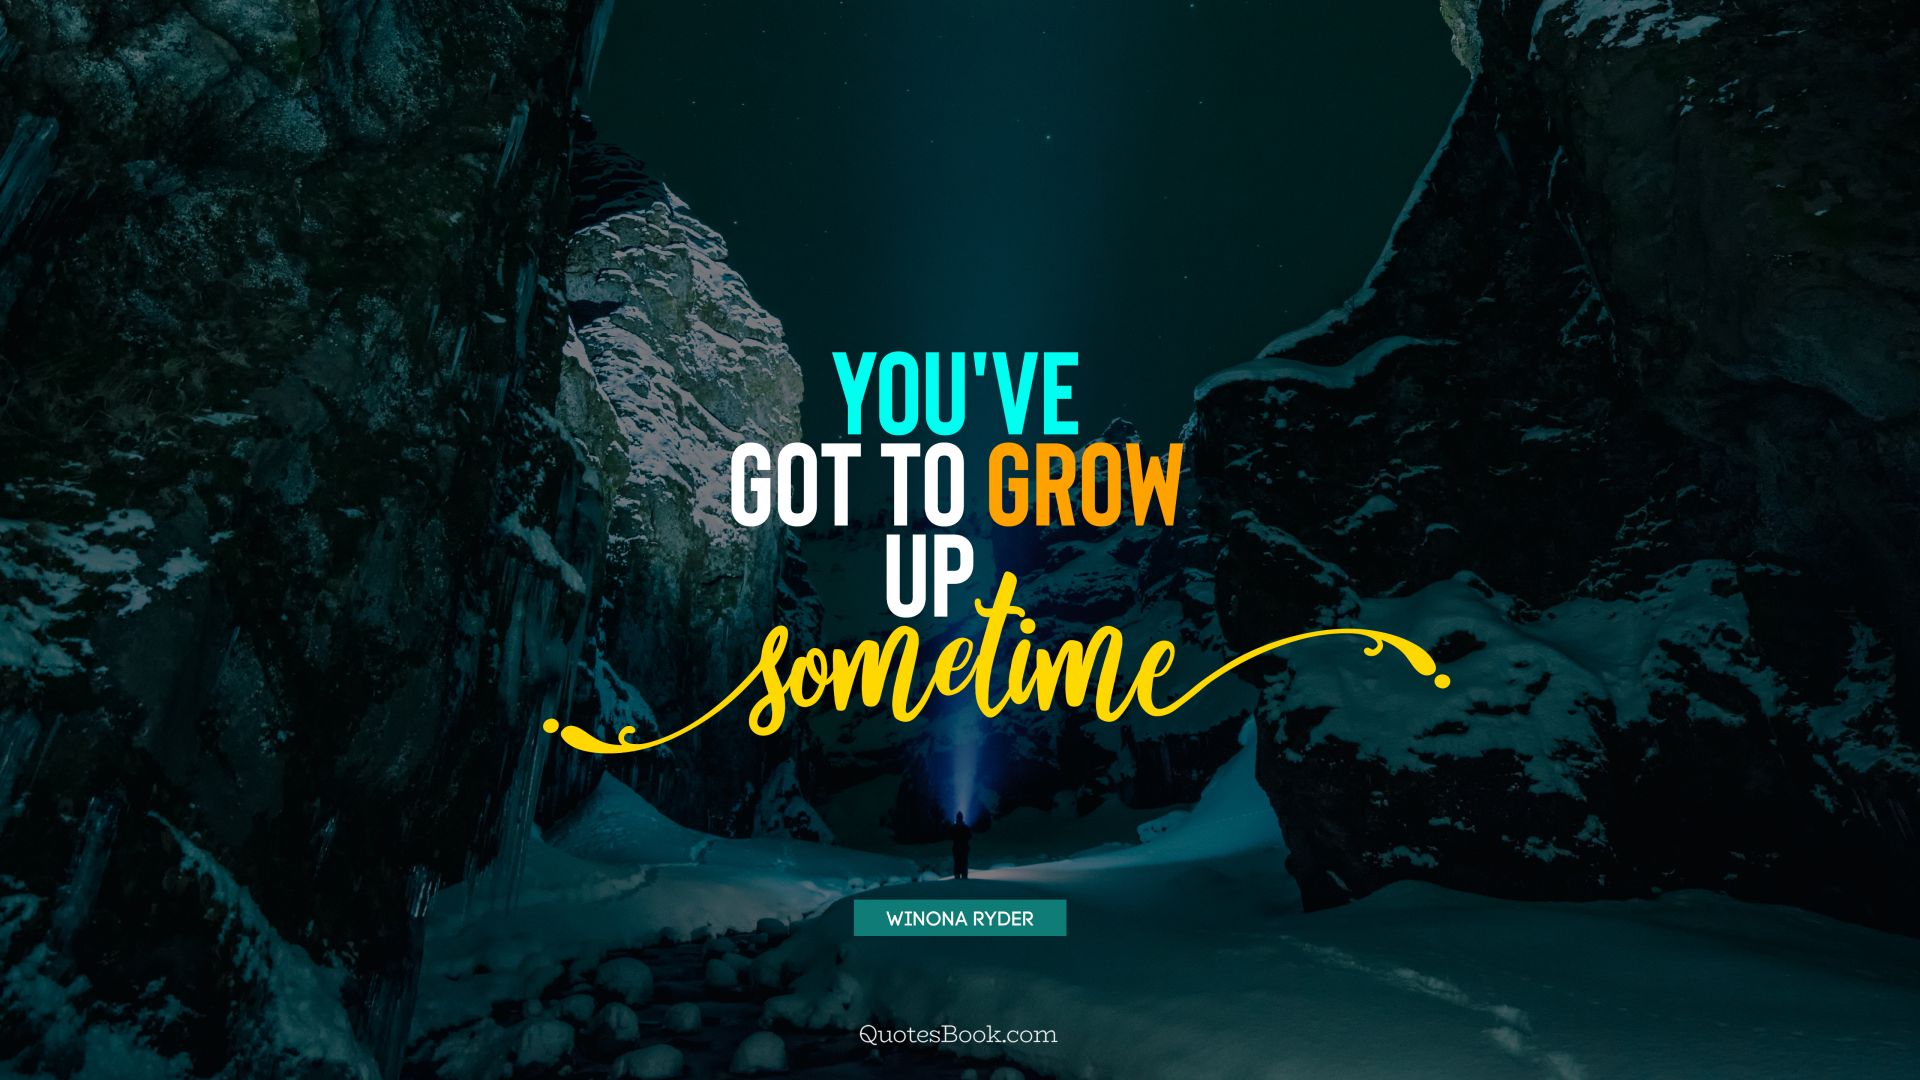 You've got to grow up sometime. - Quote by Winona Ryder